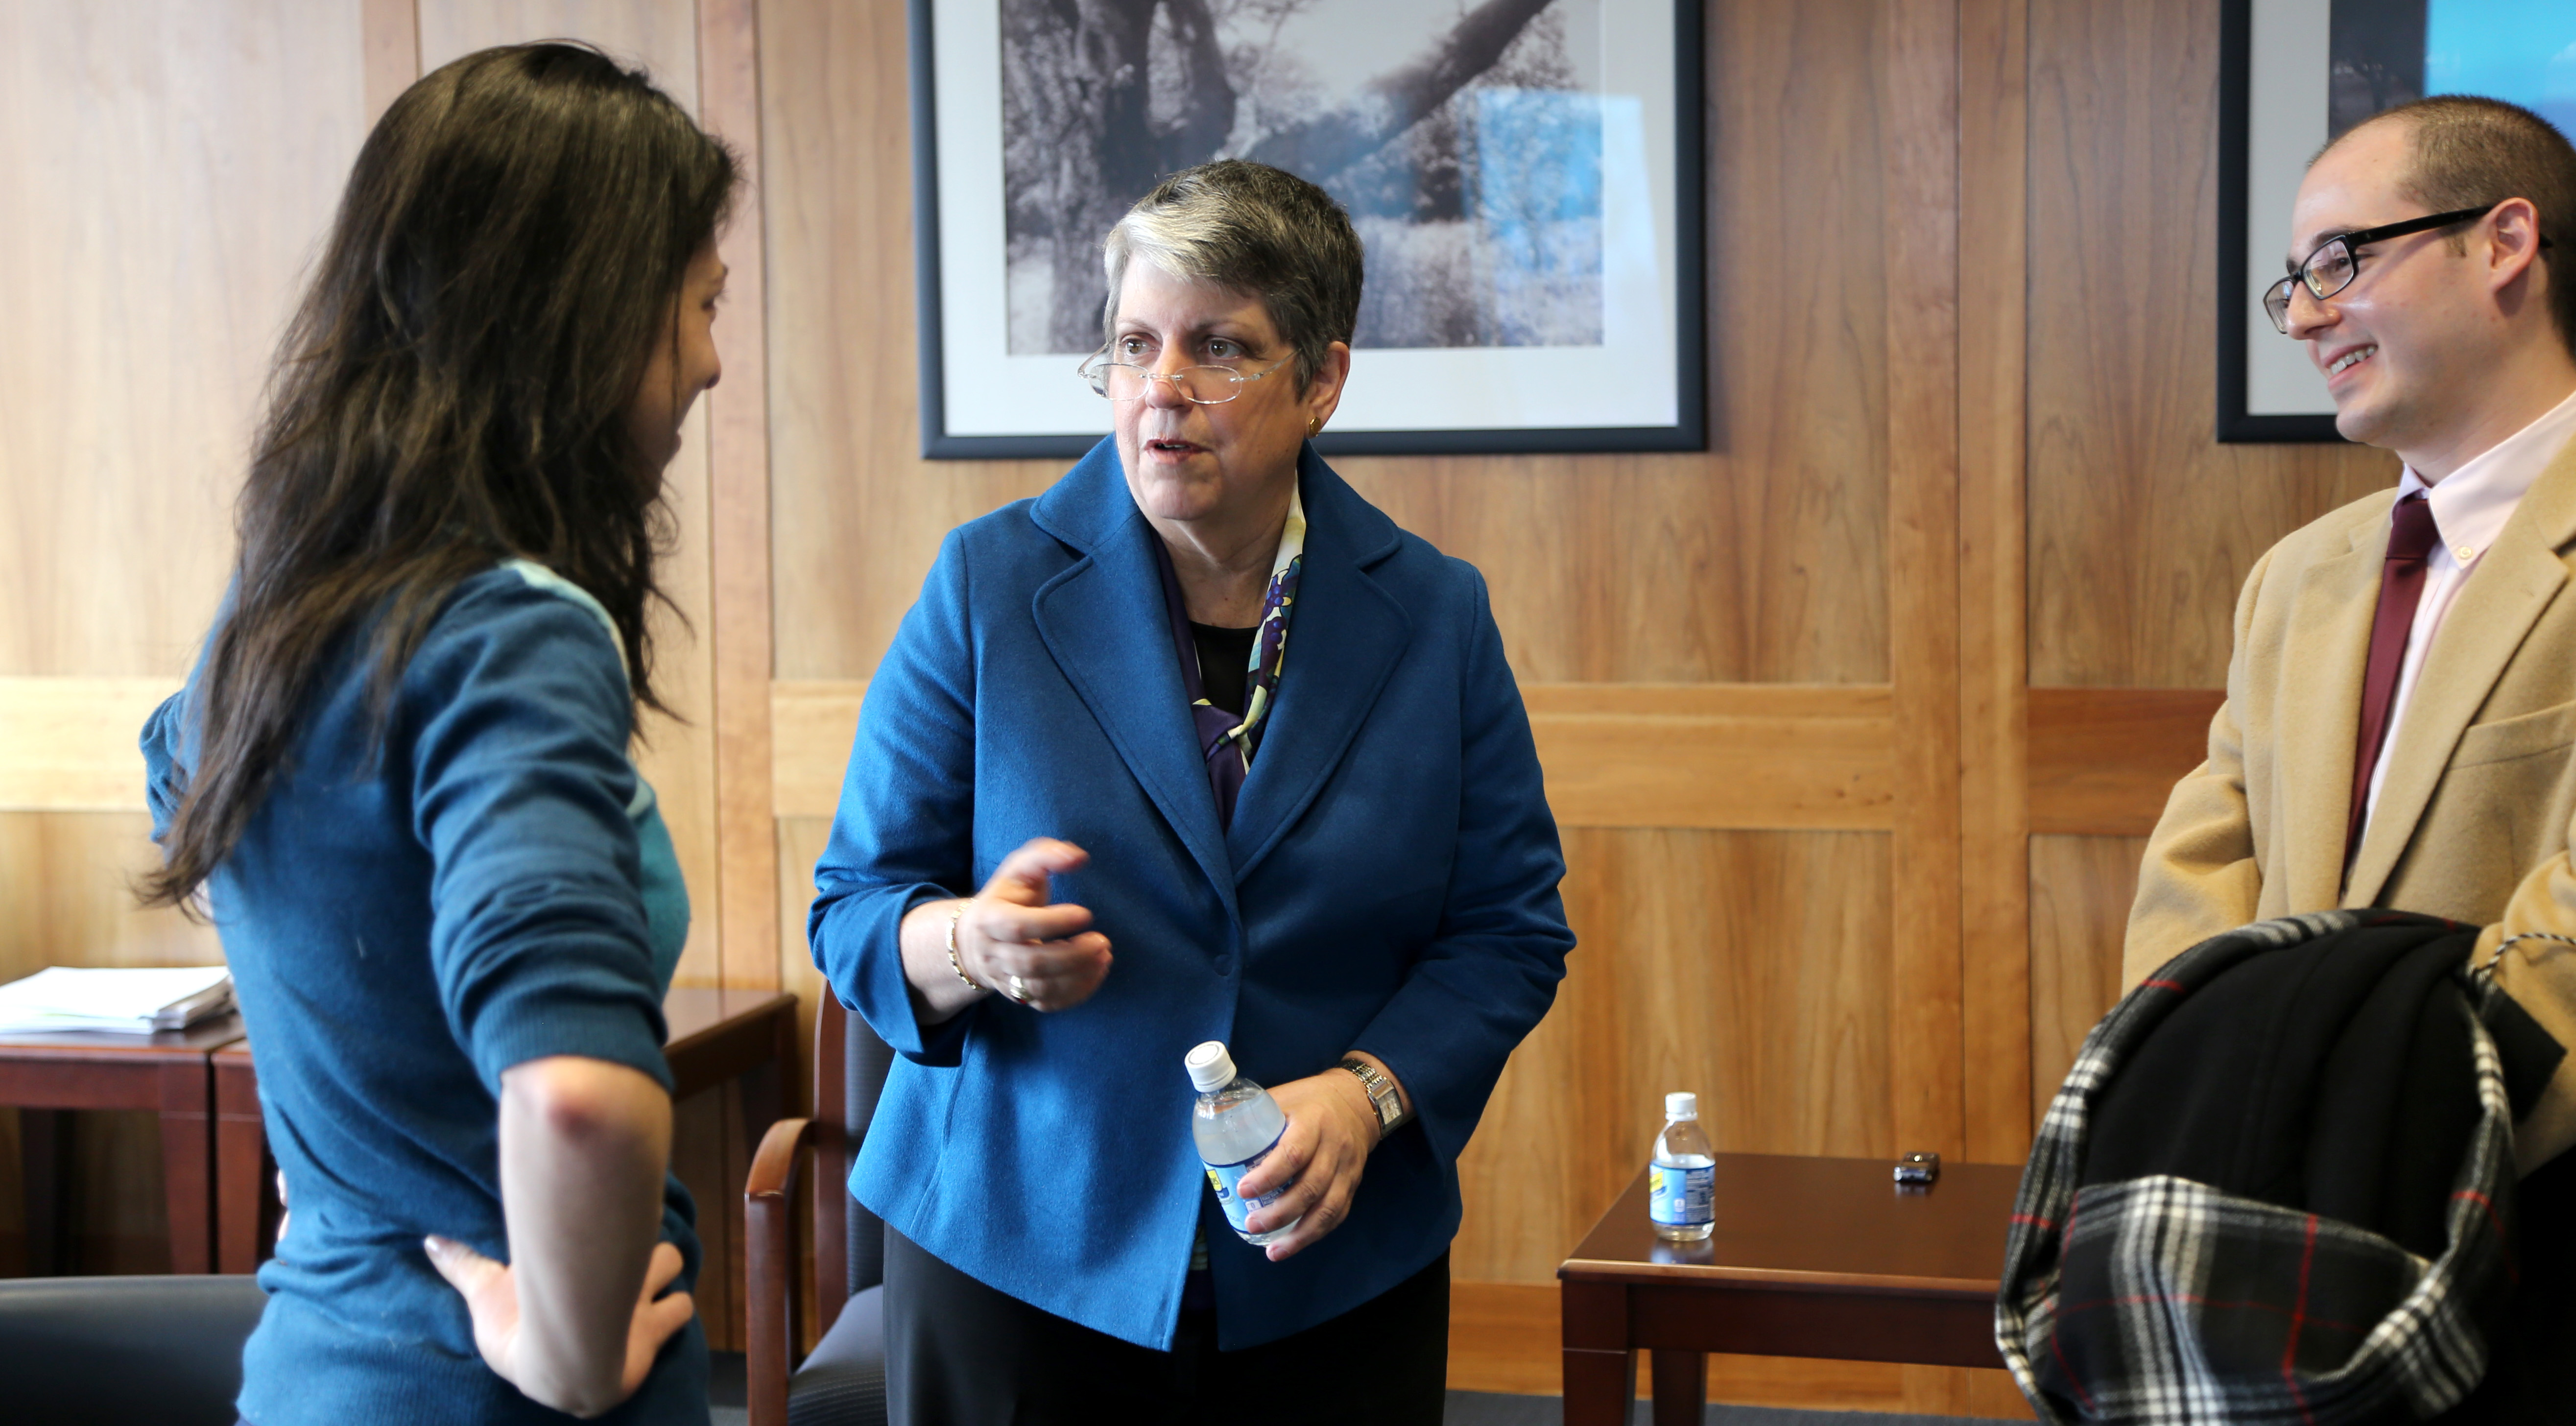 Janet Napolitano talks to a woman in her office